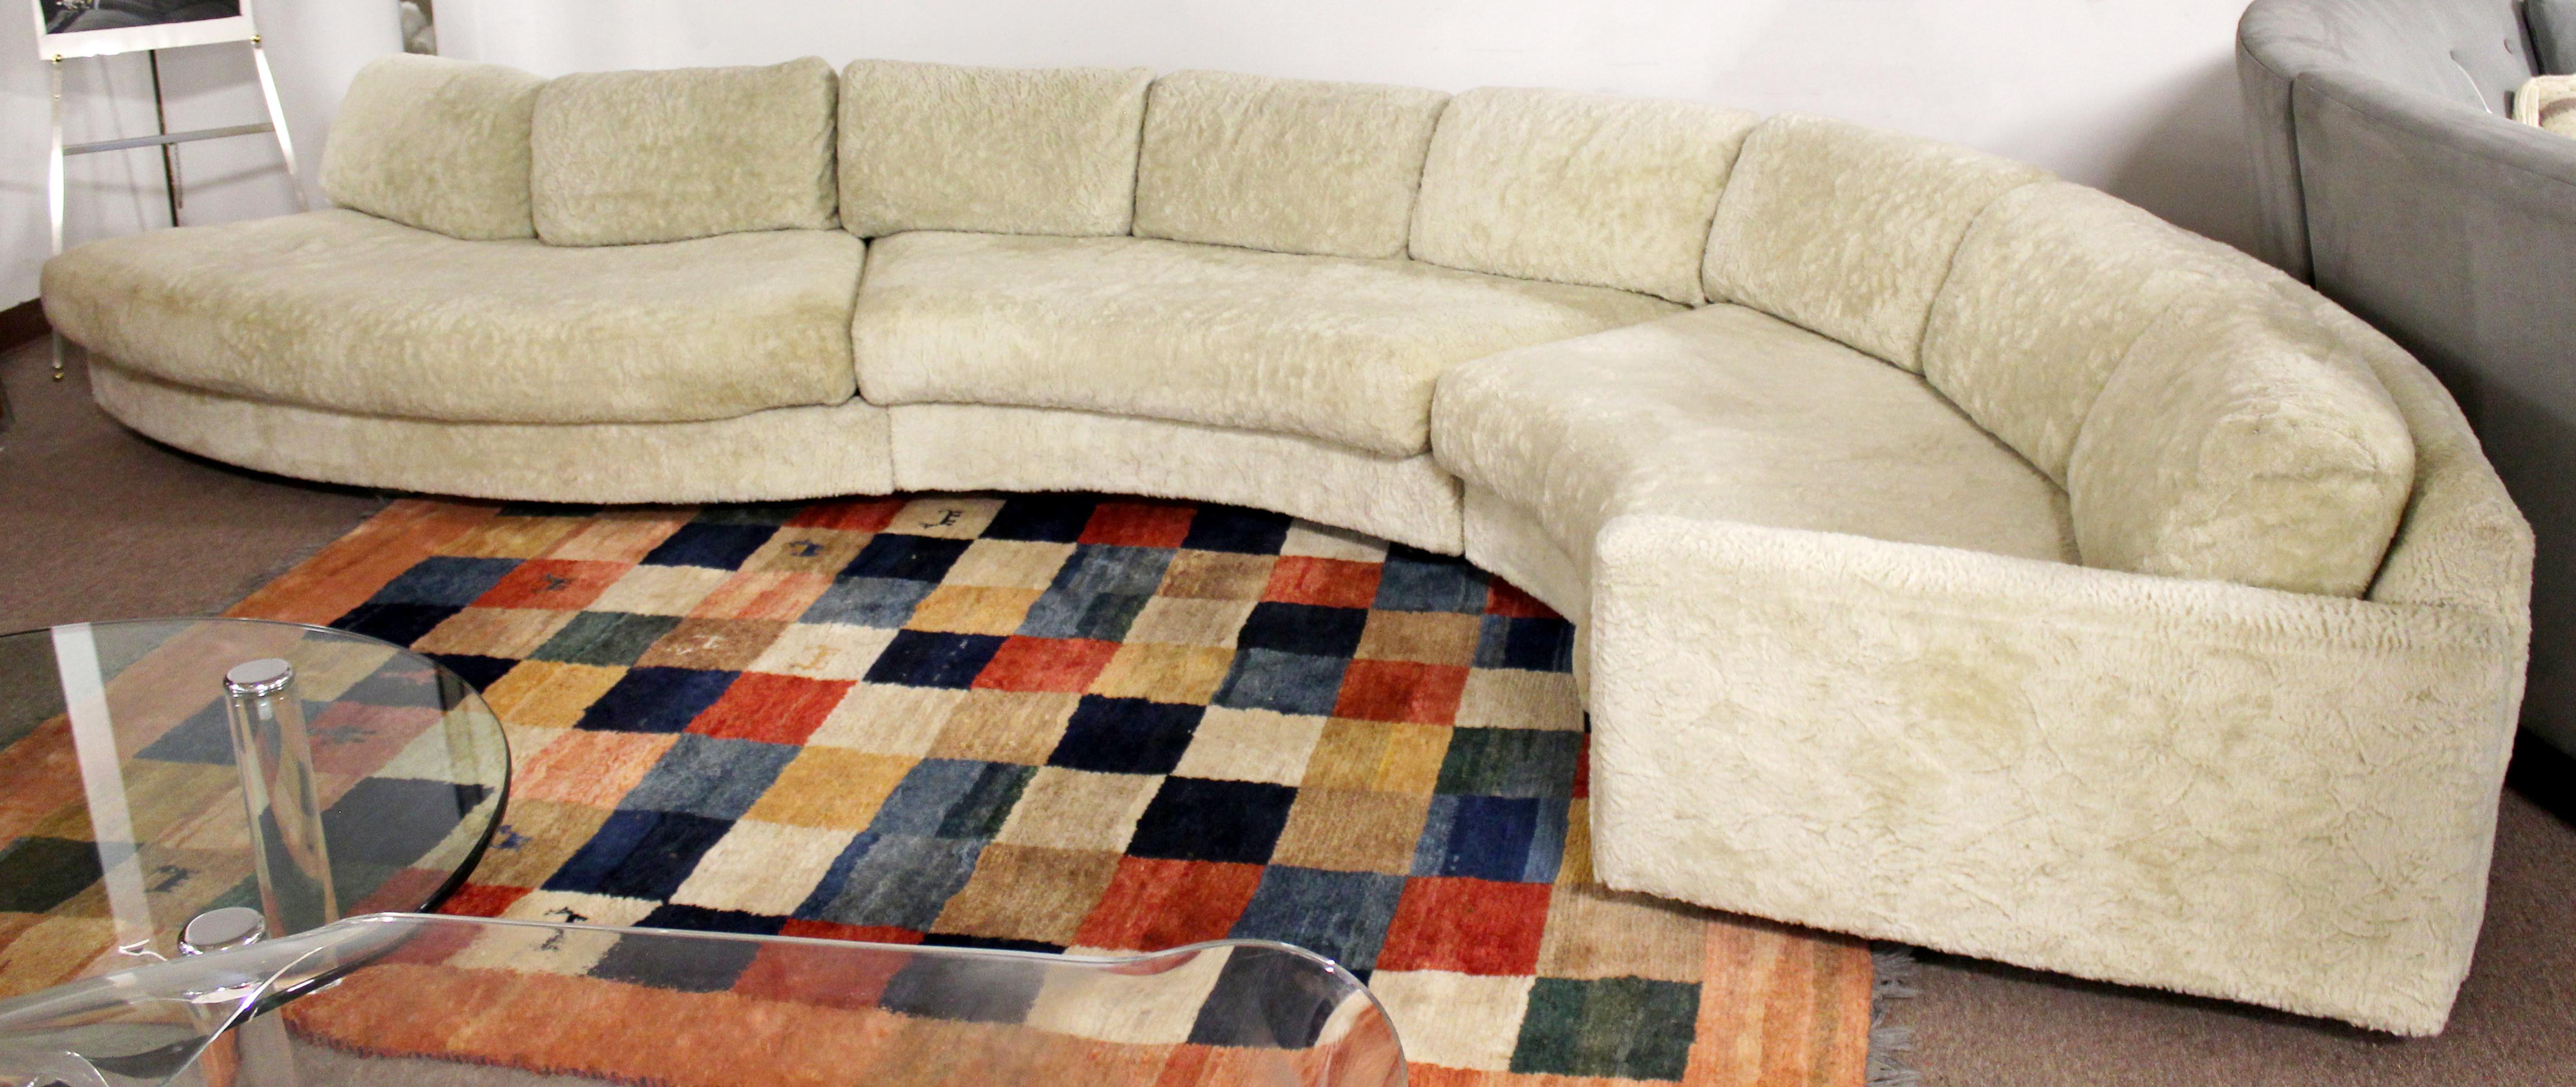 For your consideration is a mesmerizing, curved serpentine, three piece sofa sectional, by Adrian Pearsall, circa 1970s. In excellent vintage condition. The dimensions of each piece are 75